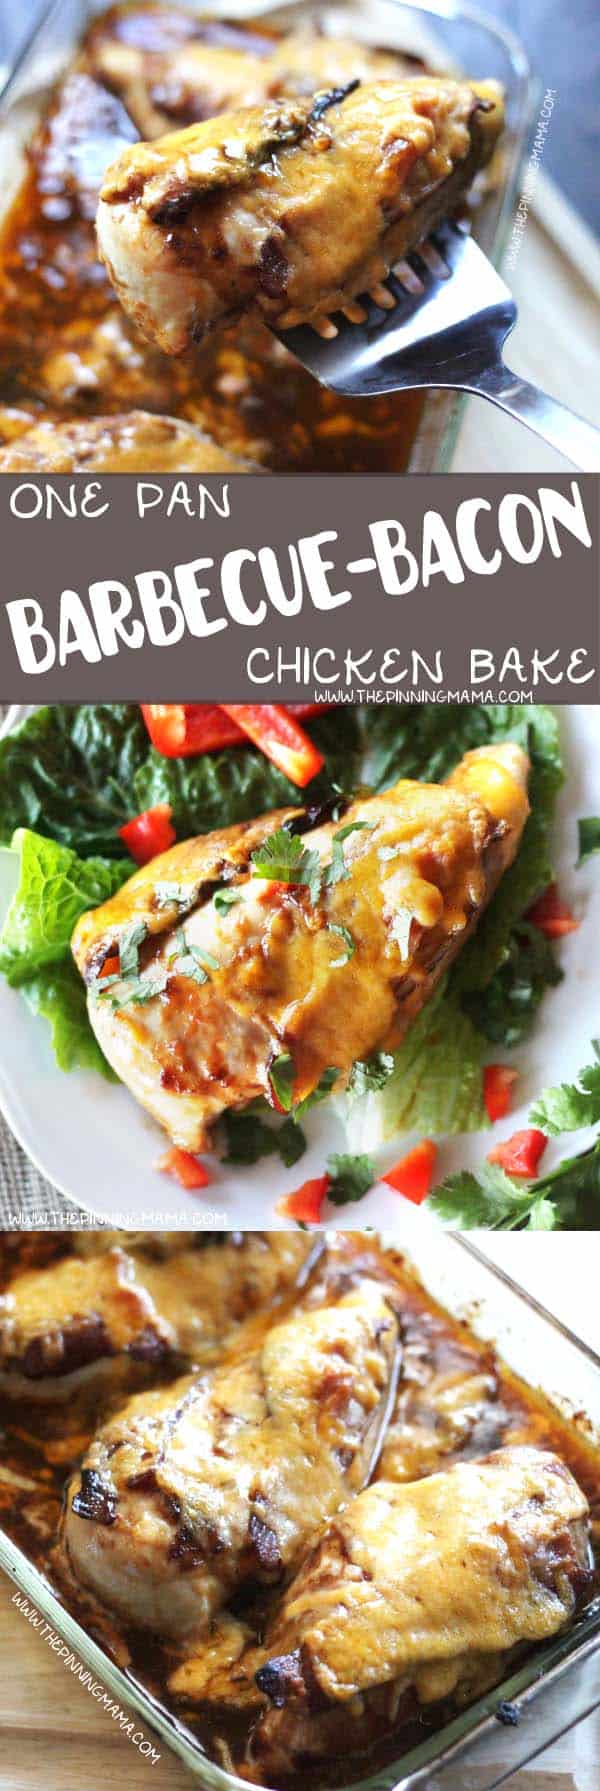 EASY BARBECUE BACON CHICKEN BAKE Recipe - The first time I made this my family gobbled it up and demanded I make again ASAP! The bacon, BBQ sauce and cheddar cheese combo is so good! We served it over rice, but this one dish casserole would be good over greens, potatoes or with traditional barbecue sides like cole slaw! 